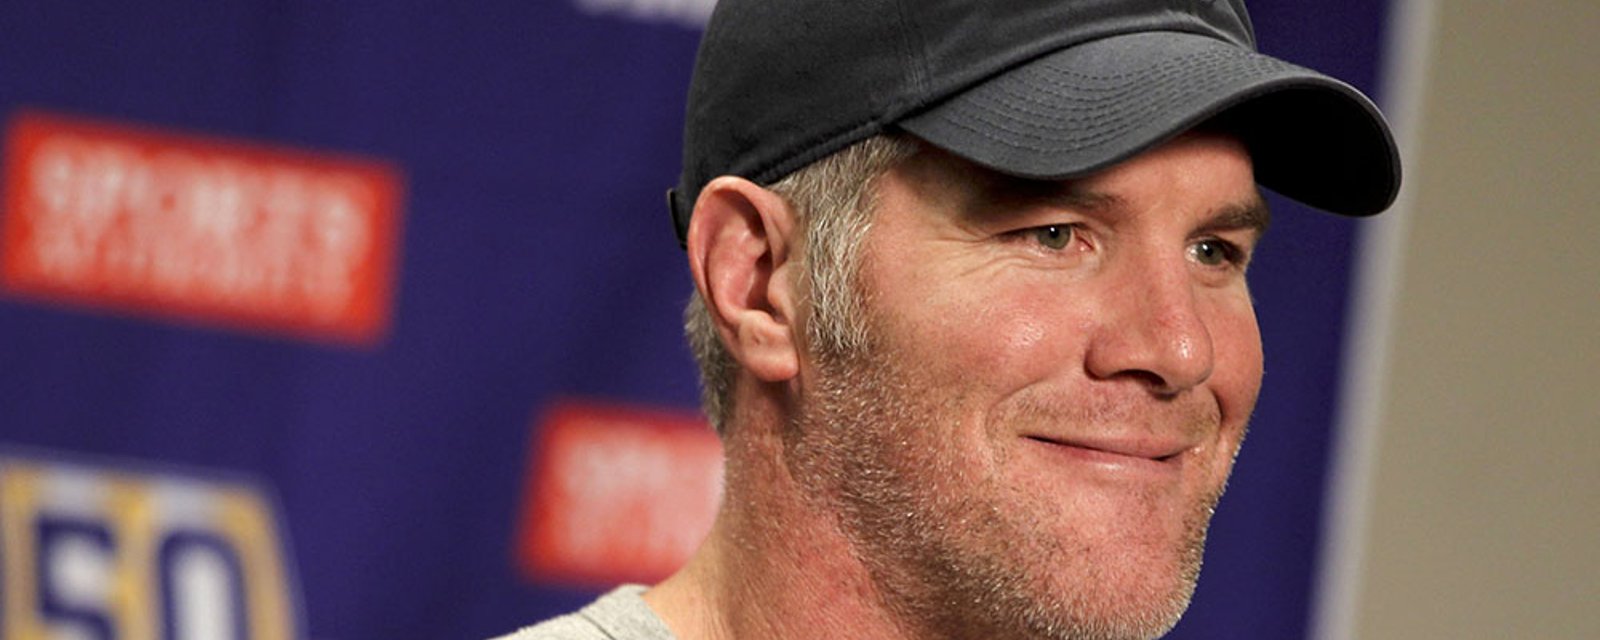 Brett Favre says he suffered a shocking number of brain injuries 